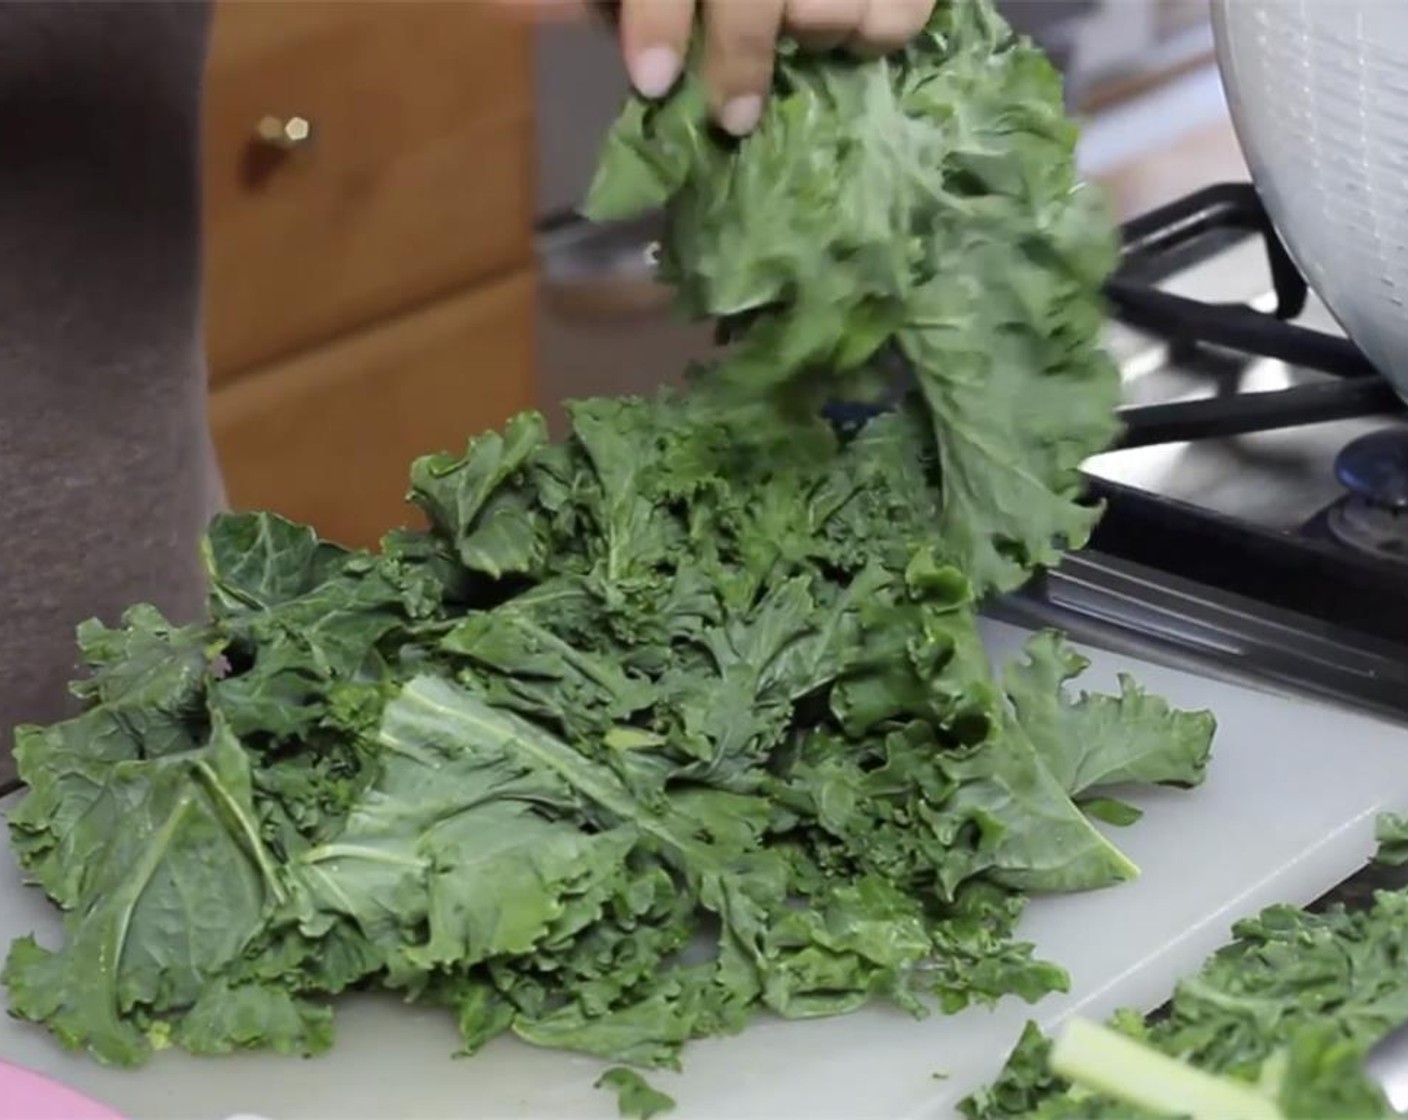 step 1 Strip the leaves from the stalks of the Kale (1 bunch) by grabbing the leaves and pulling away from the stalk.